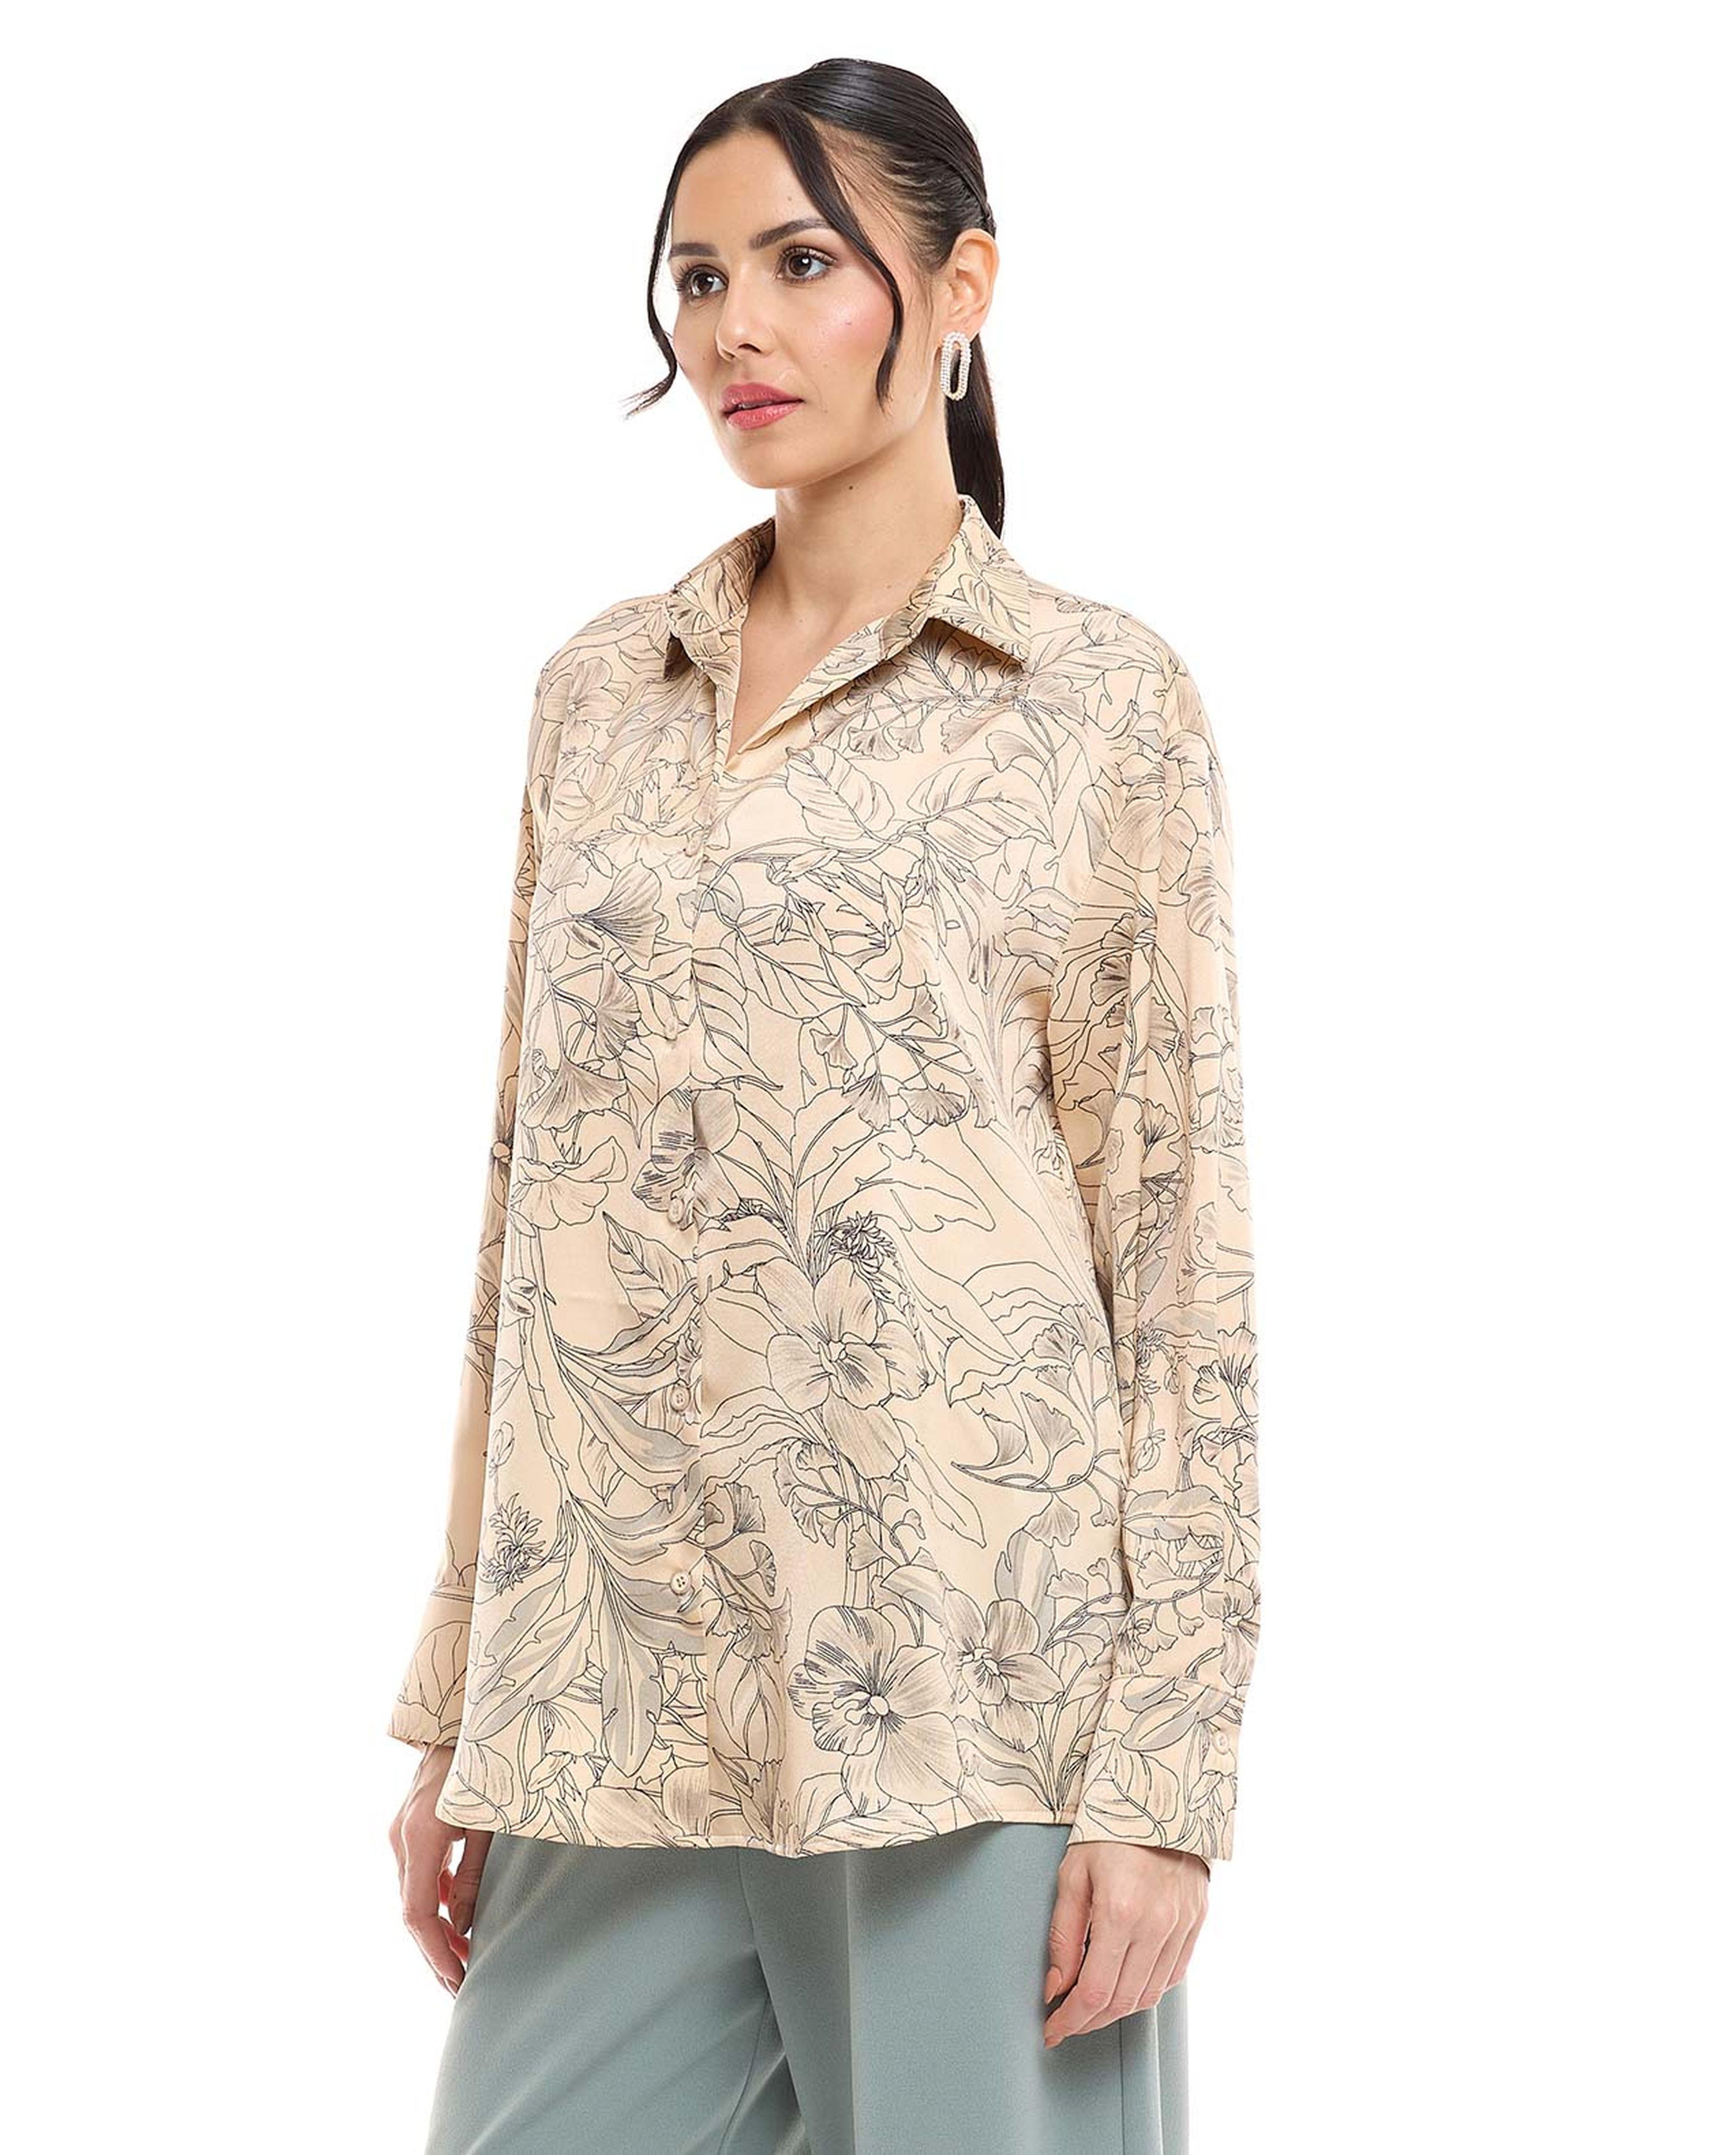 Floral Printed Shirt with Classic Collar and Long Sleeves